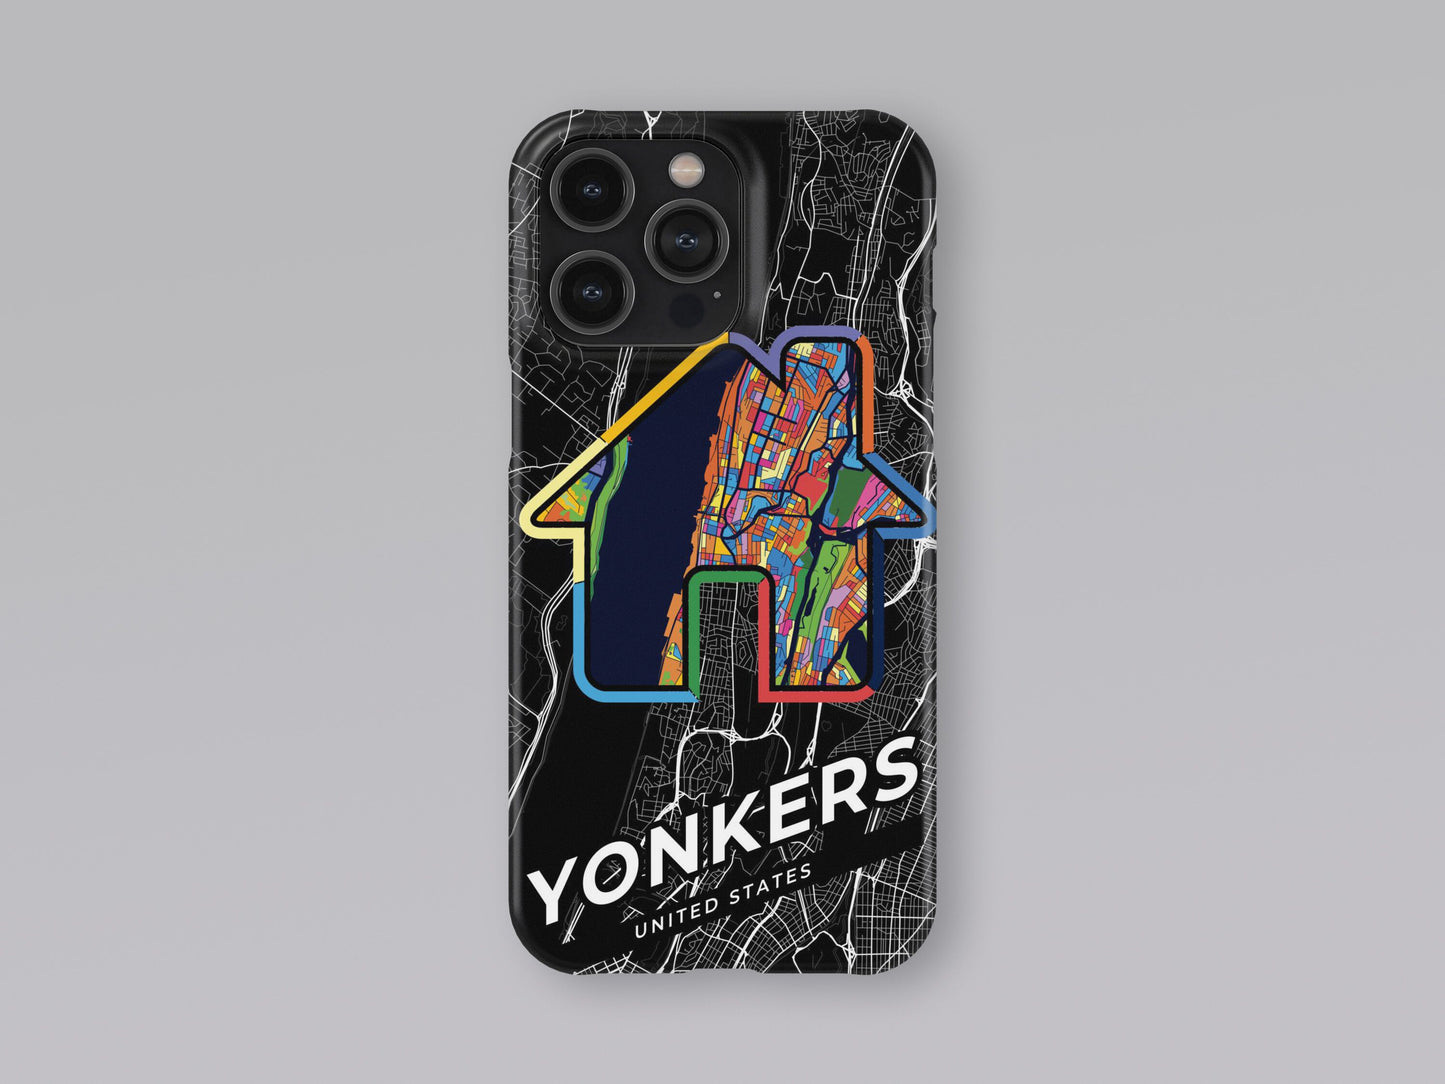 Yonkers New York slim phone case with colorful icon 3